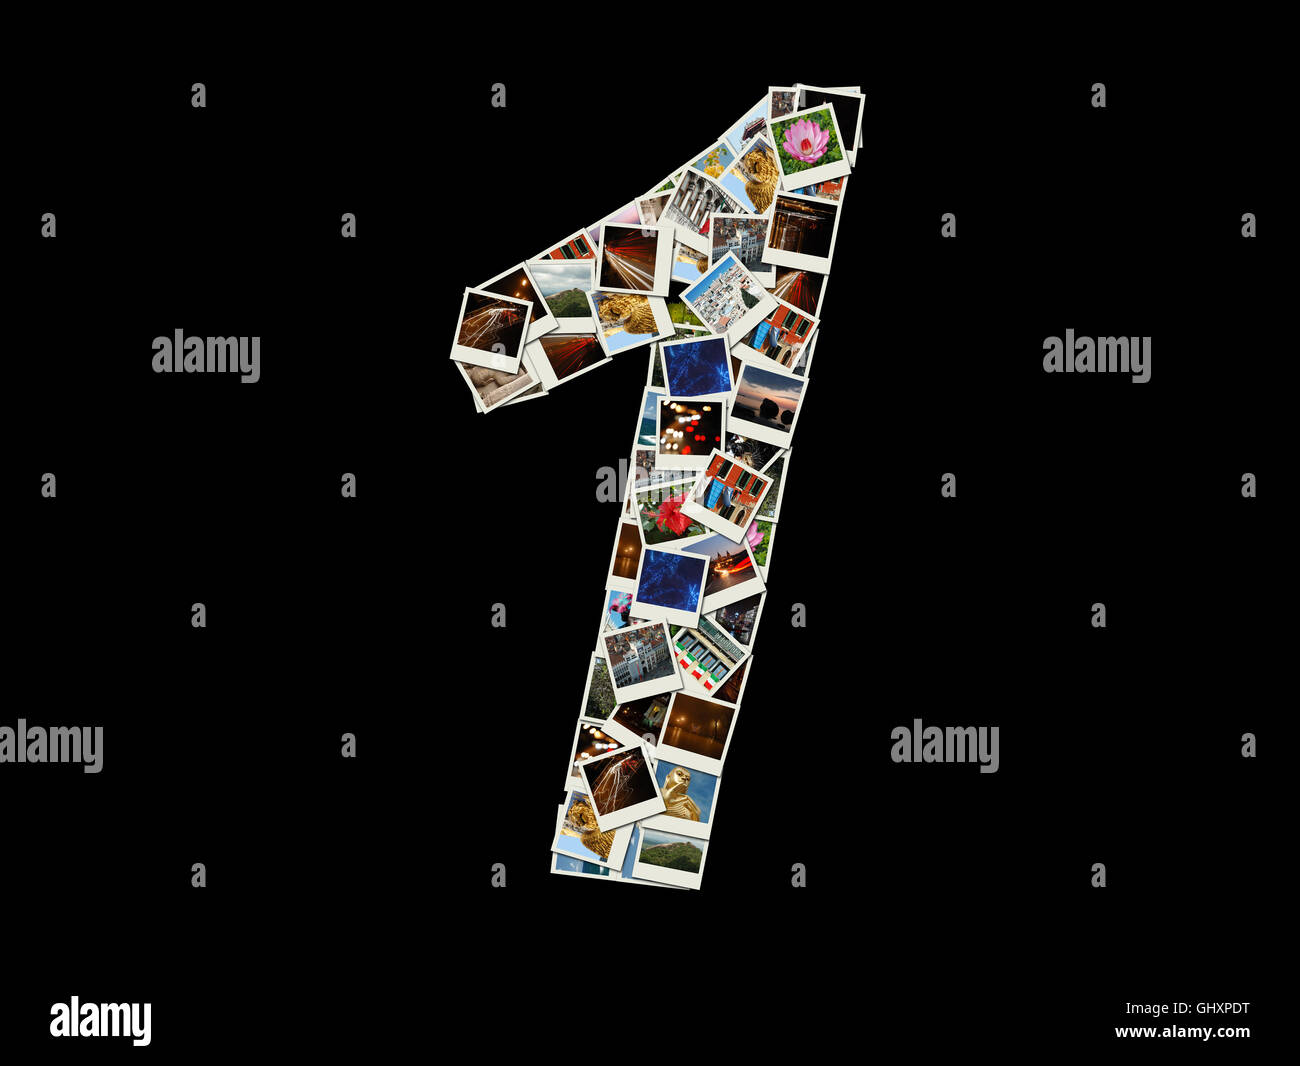 Shape of  '1' figure made like collage of travel photos Stock Photo